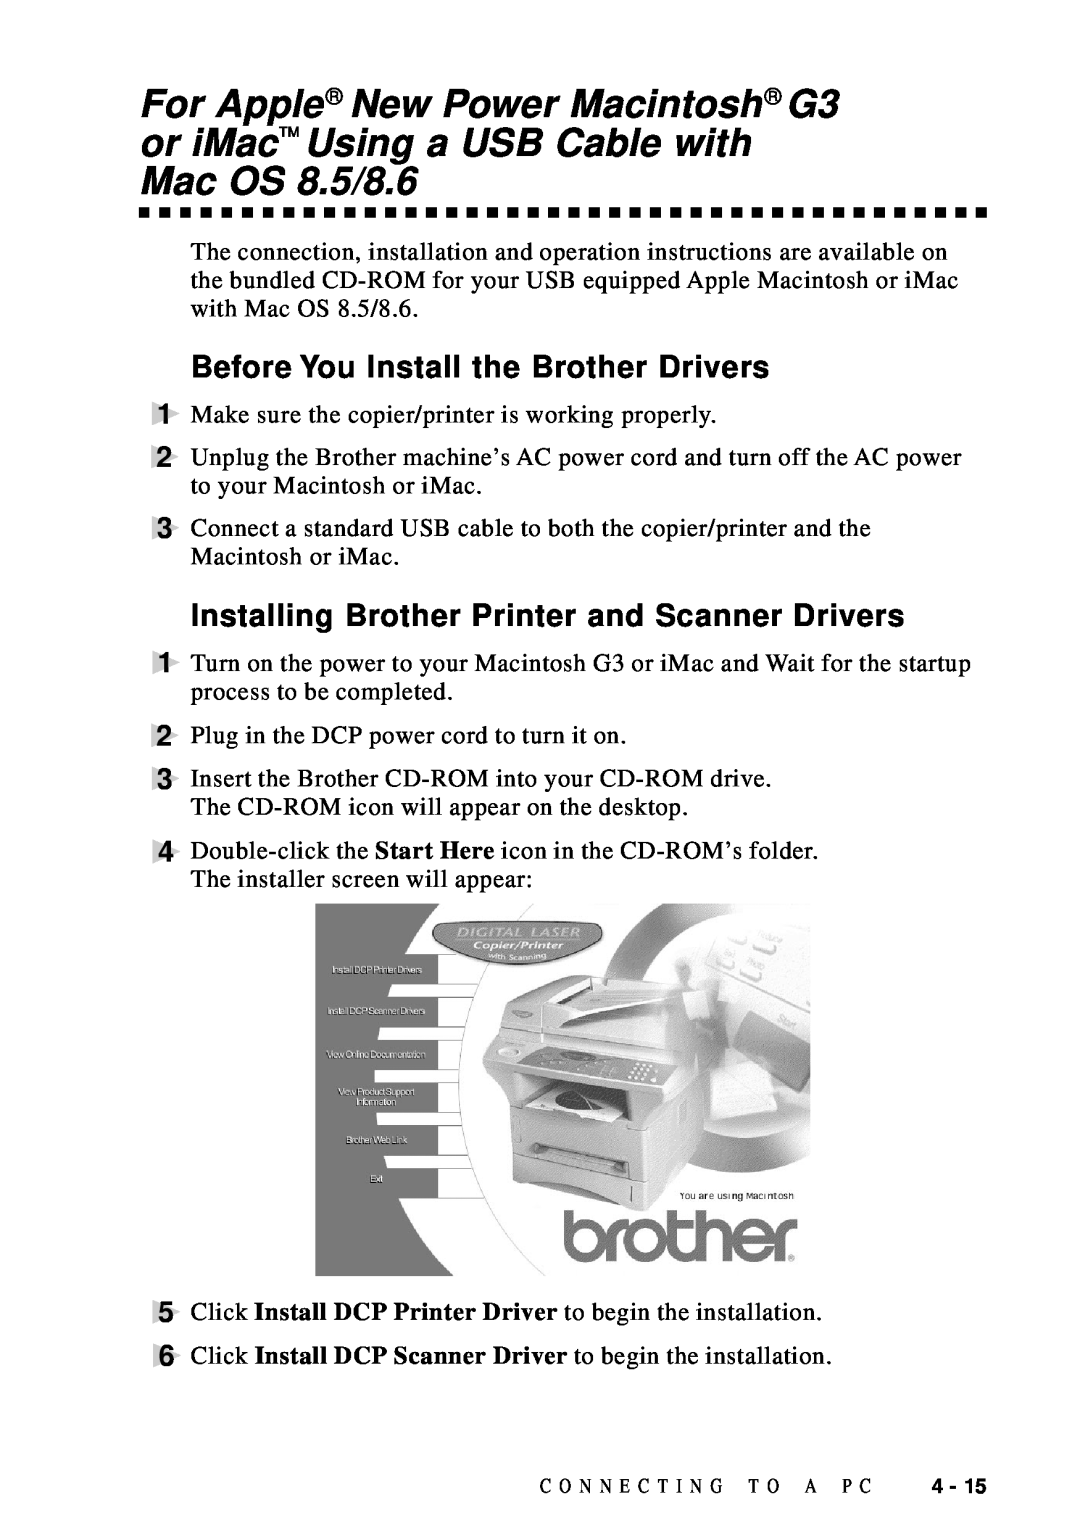 Brother DCP1200 manual For Apple New Power Macintosh G3 or iMac Using a USB Cable with, Mac OS 8.5/8.6 